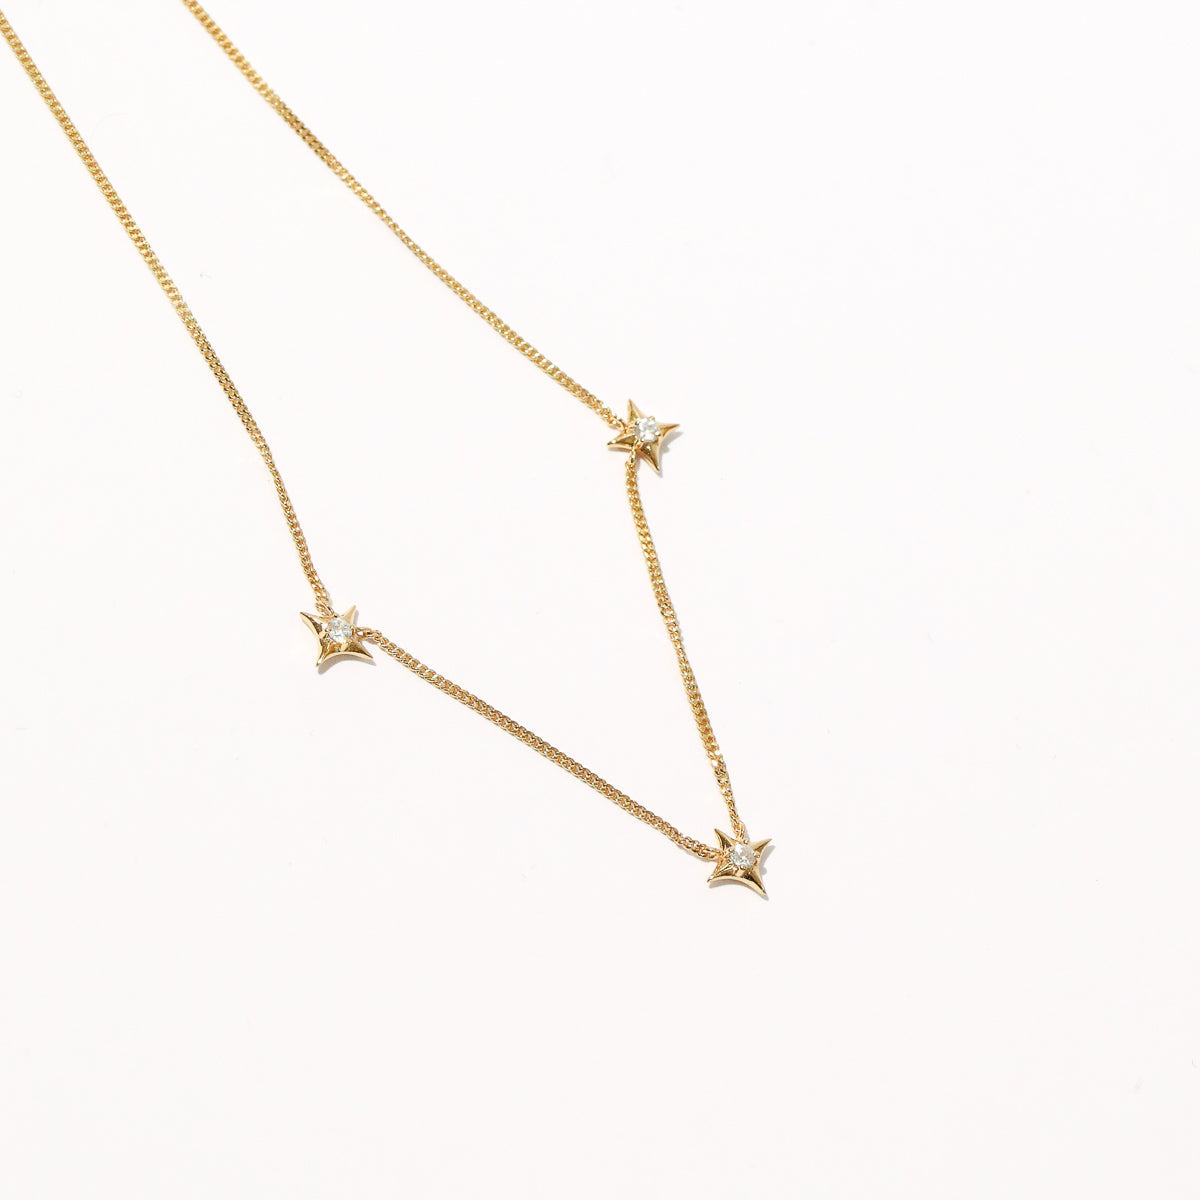 Cosmic Star Charm Necklace in Gold close up shot